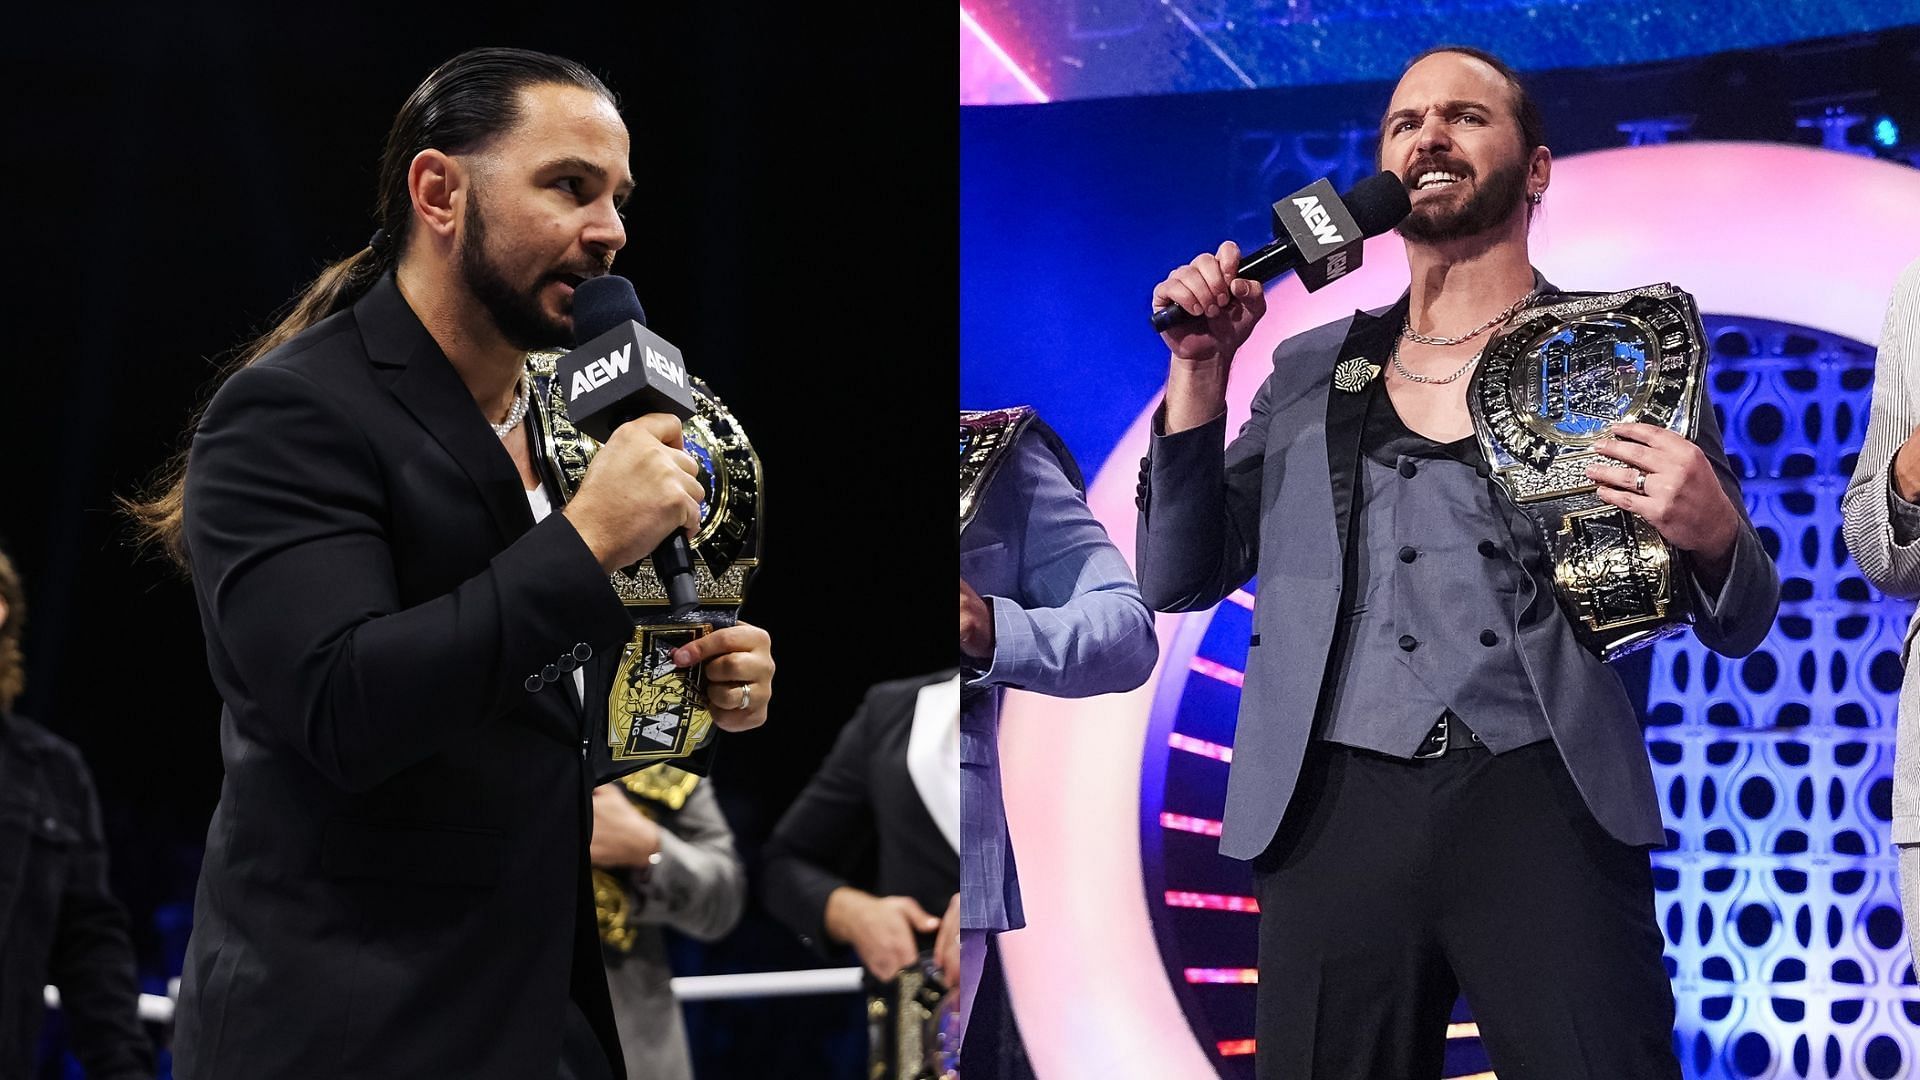 The Young Bucks are the AEW World Tag Team Champions [Photos courtesy of AEW